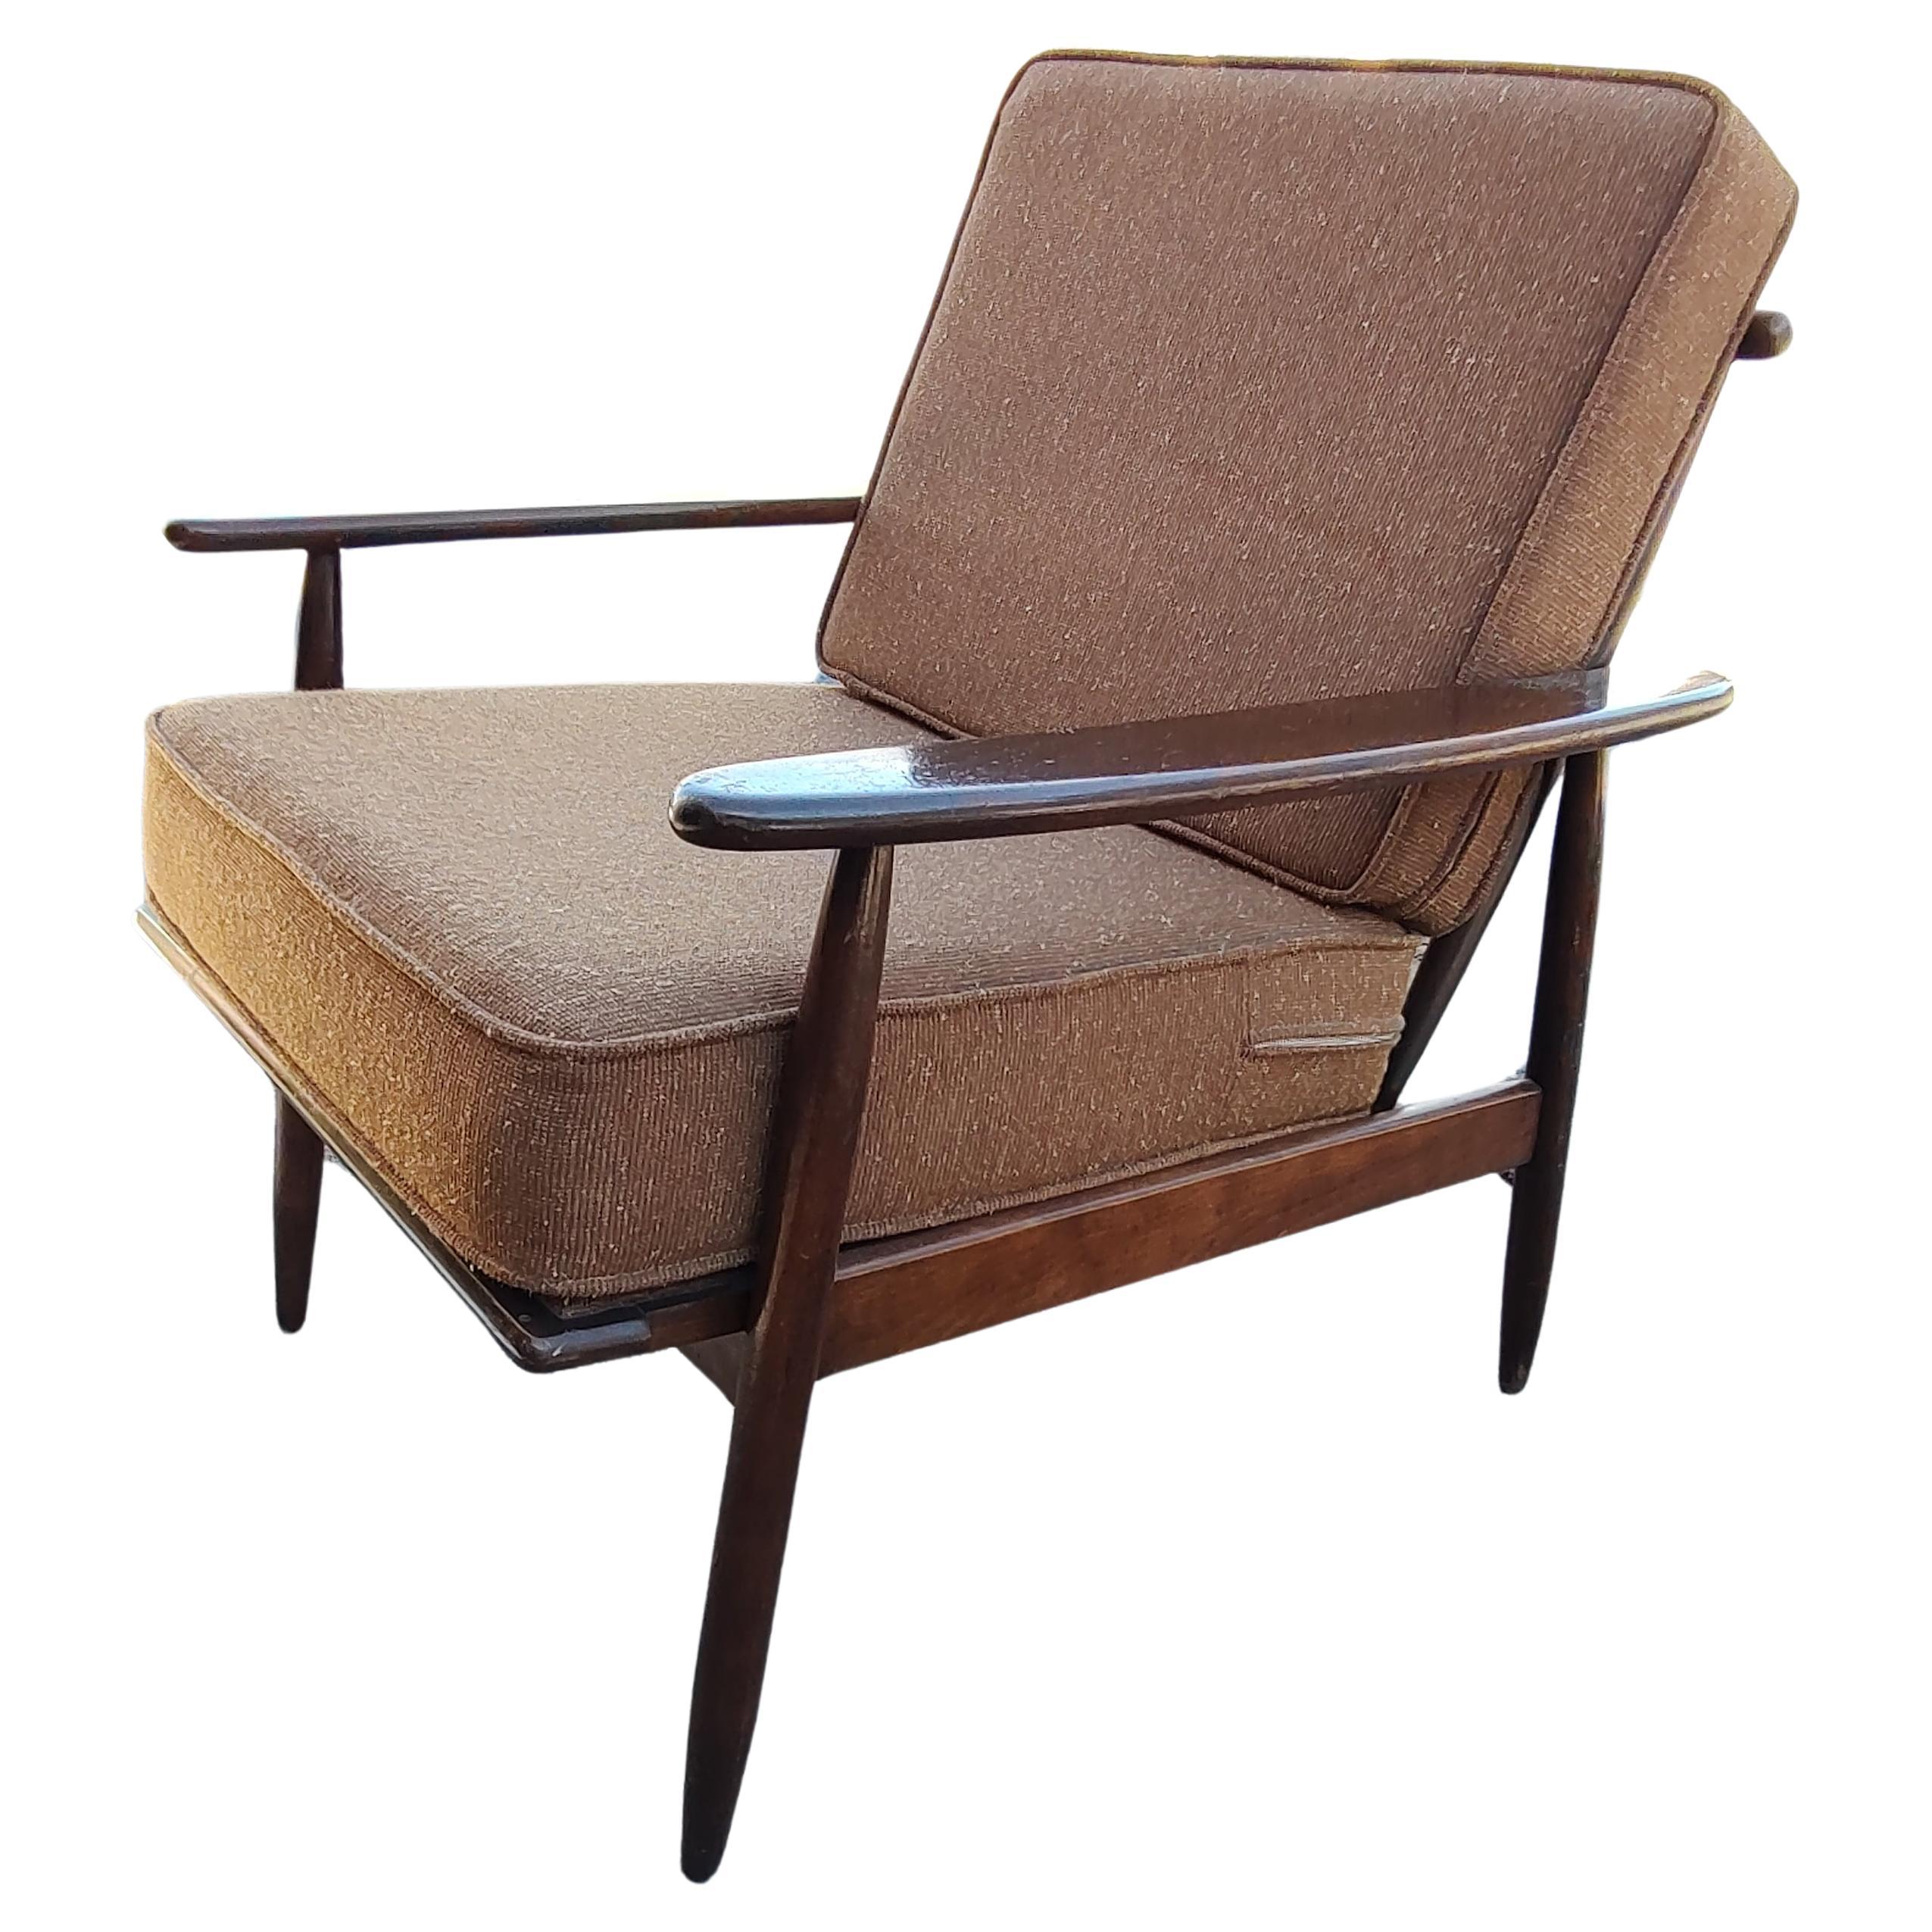 American Mid Century Modern Walnut Lounge Chairs C1958 For Sale